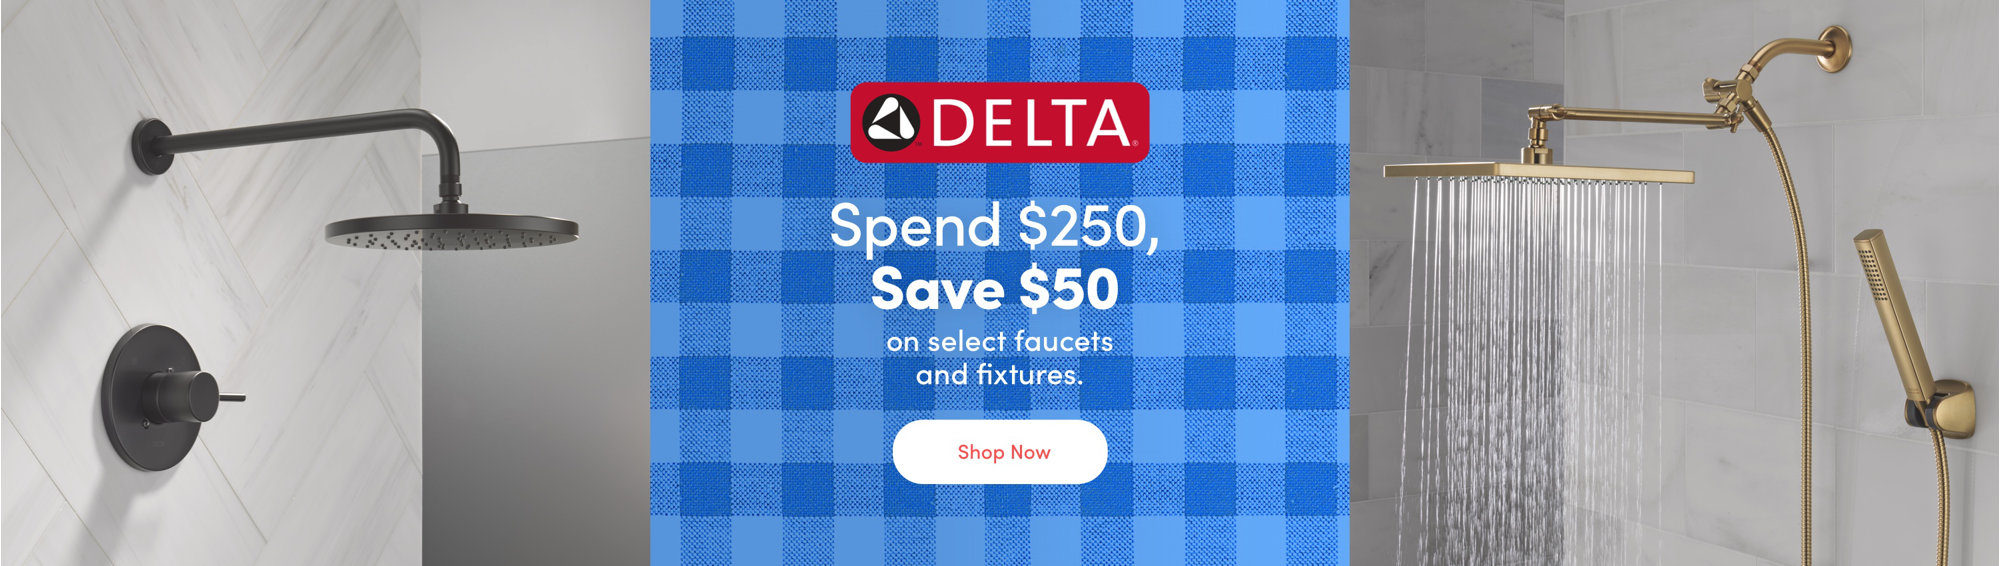 Delta Spend $250, Save $50 on select faucets and fixtures. Shop Now